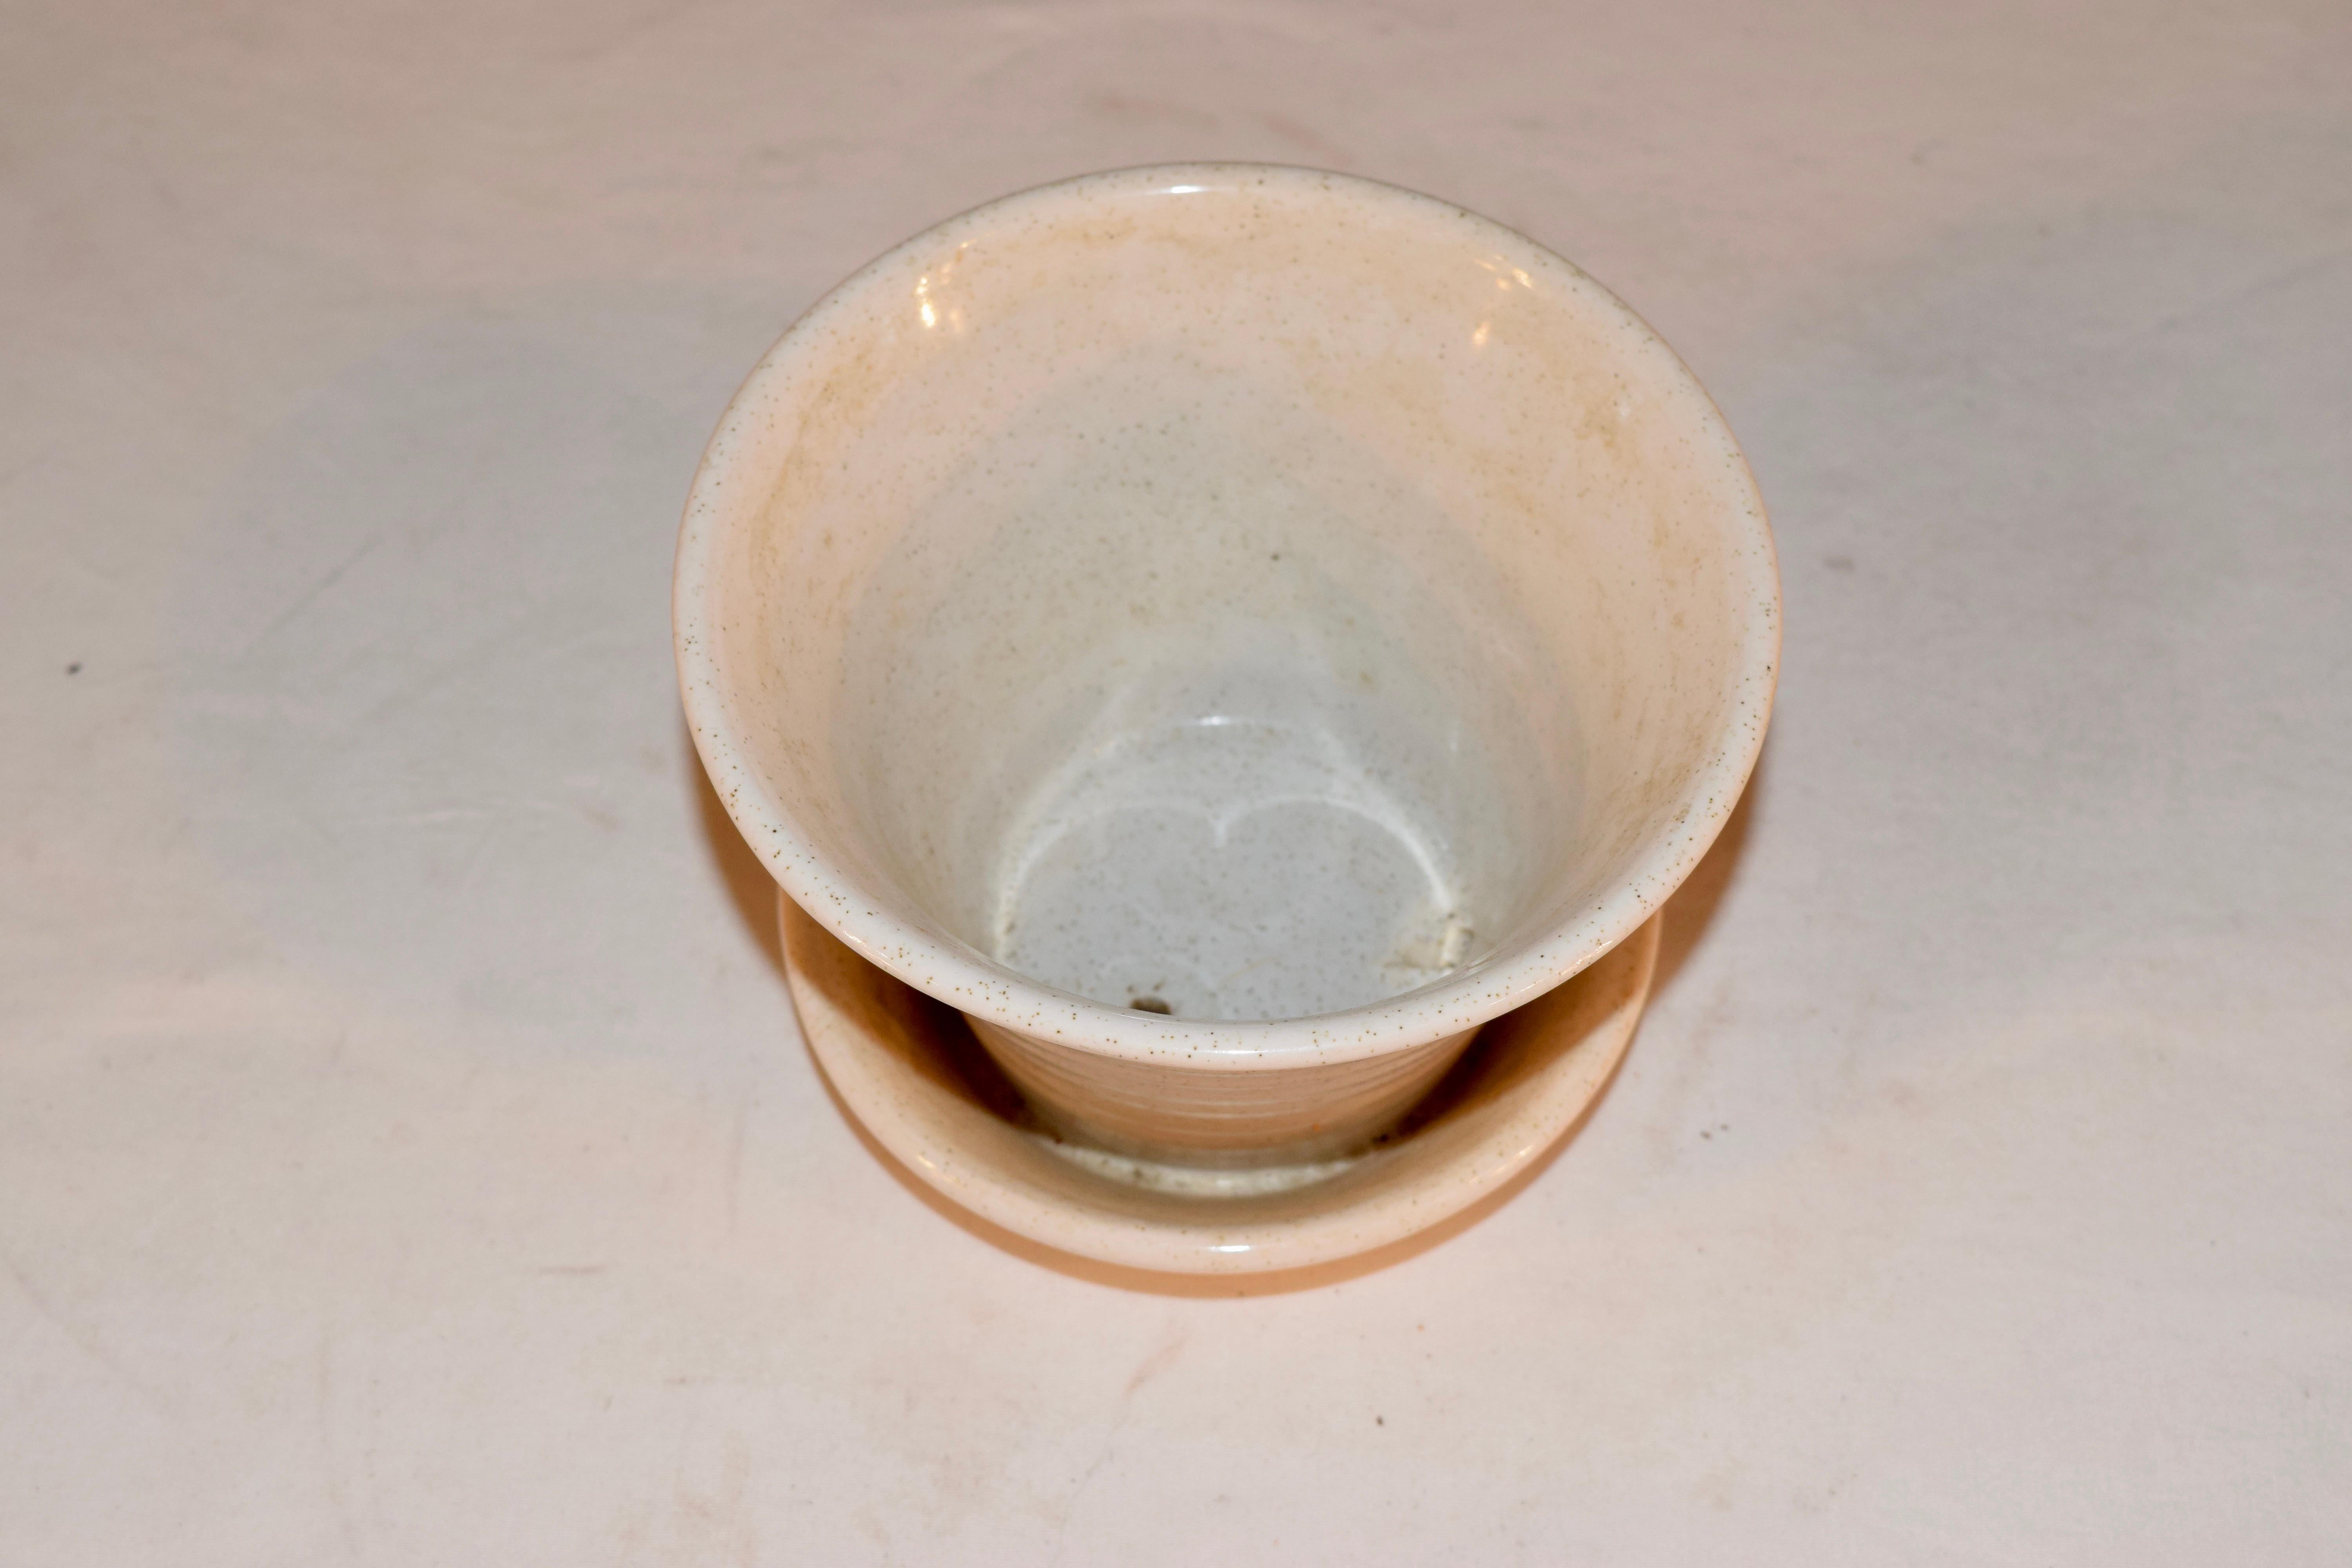 Pfaltzgraff white pottery flower pot with attached saucer, which has a water drain built in.